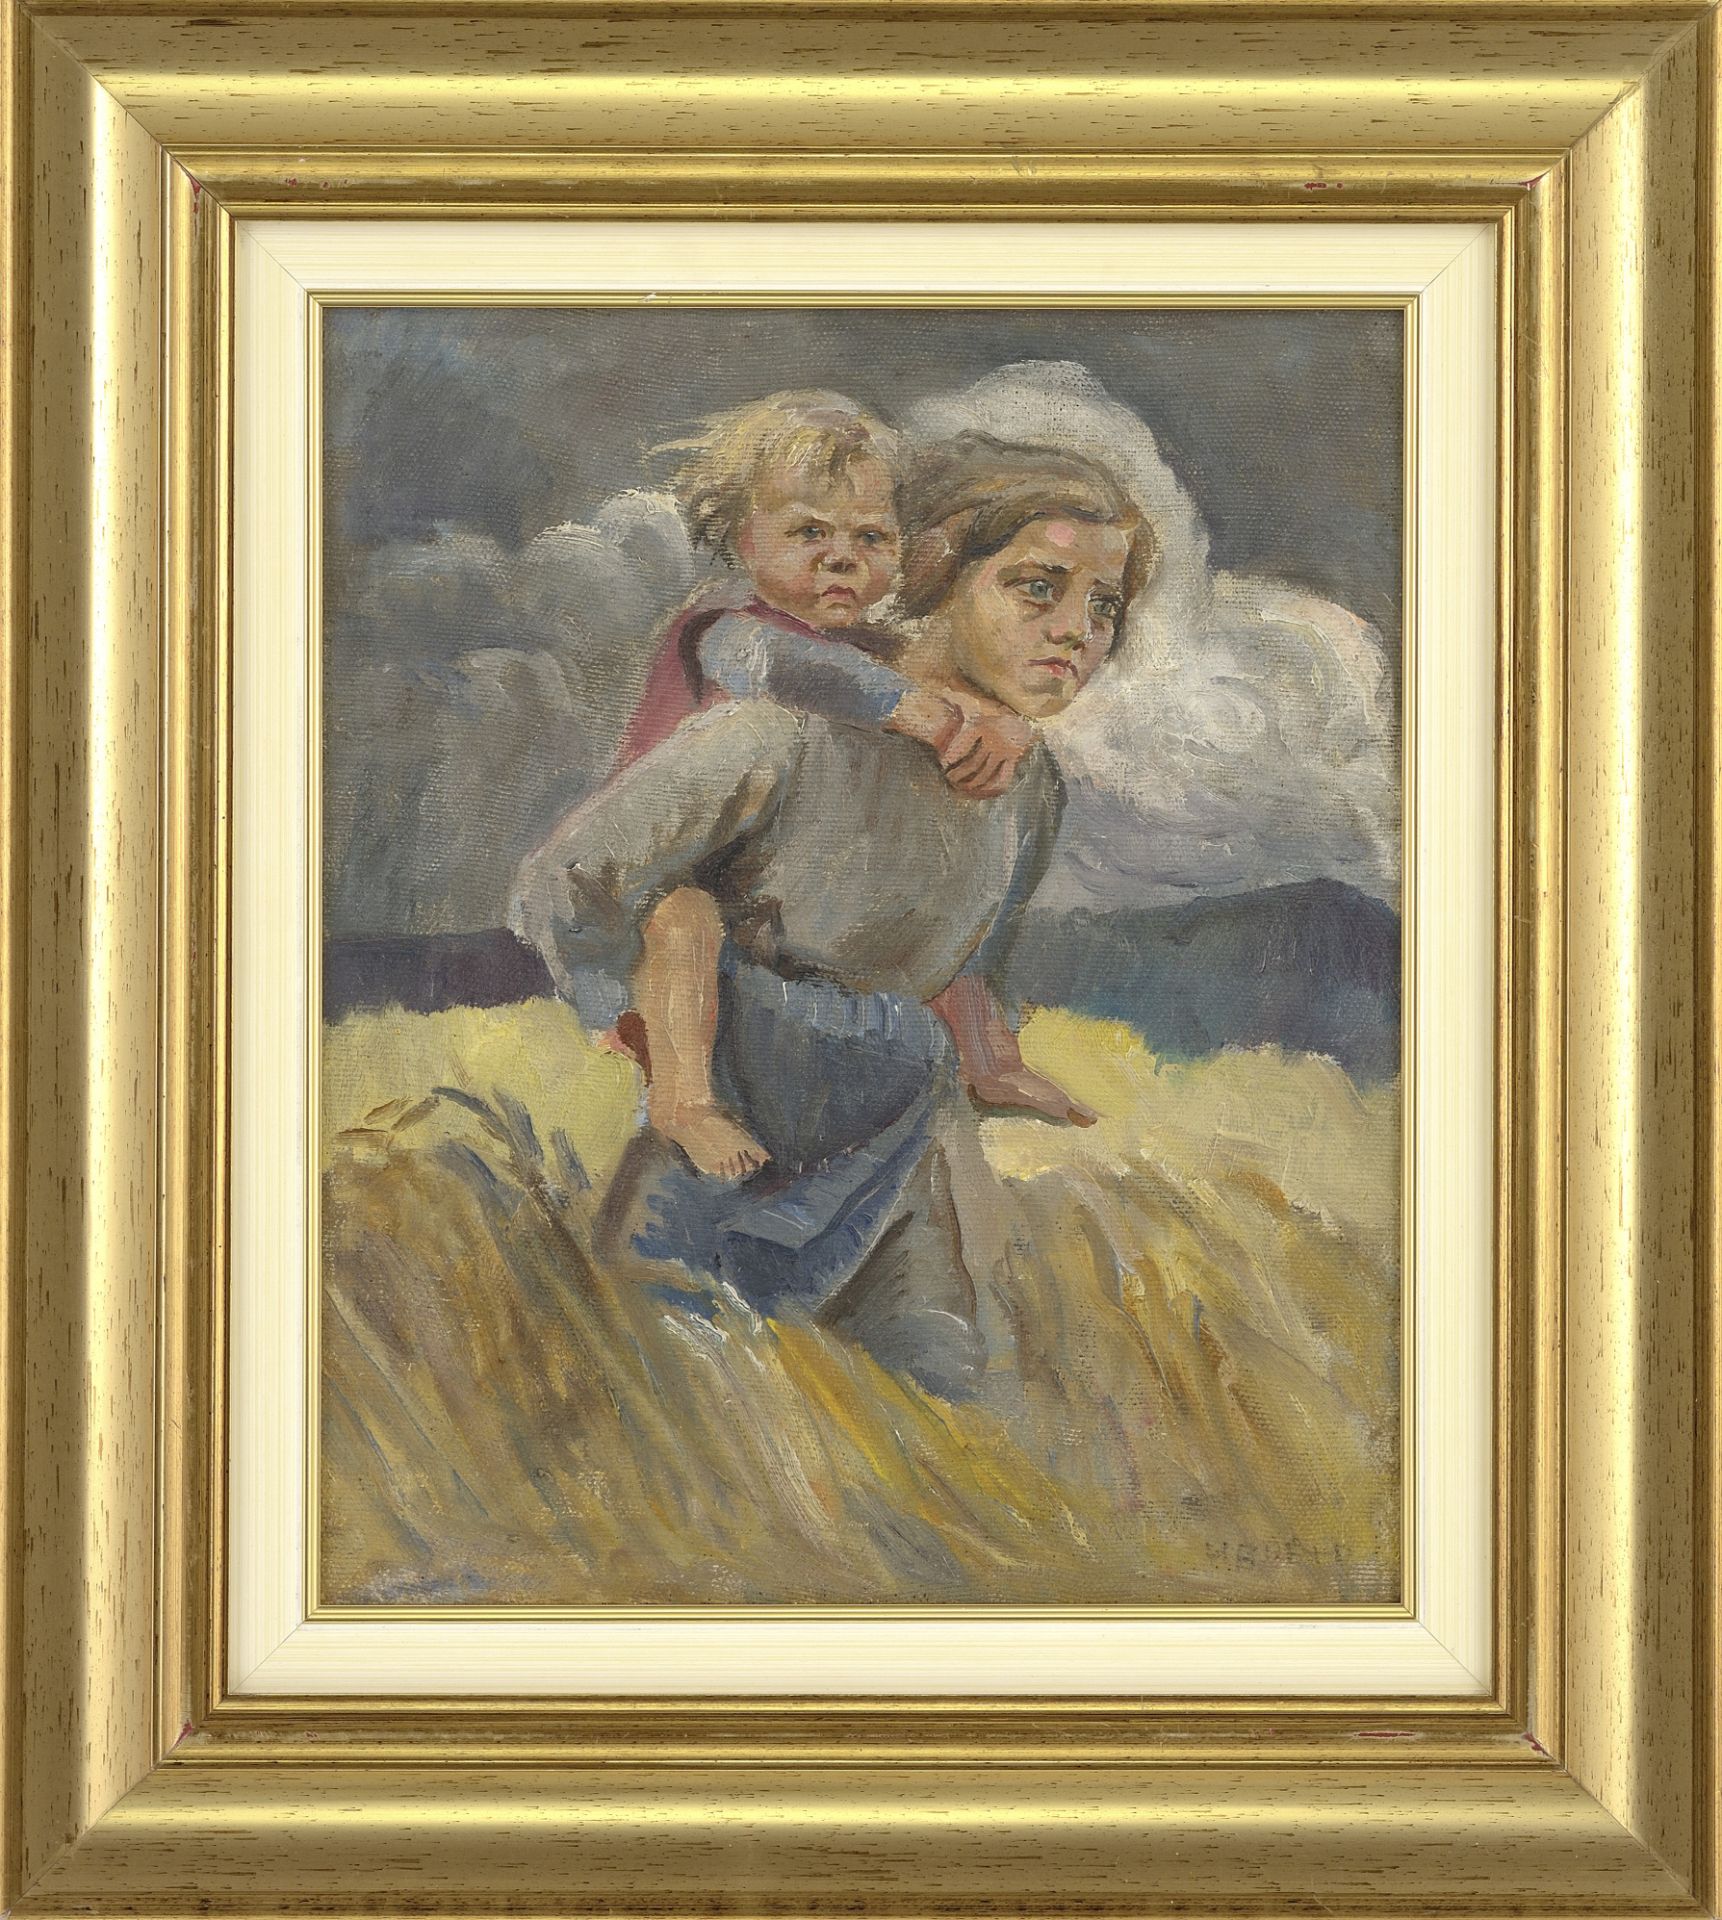 Ivan Petrov Ivanov /1909-1991/  "Before the Storm" (The Artist's Wife and Daughter) - Image 2 of 4